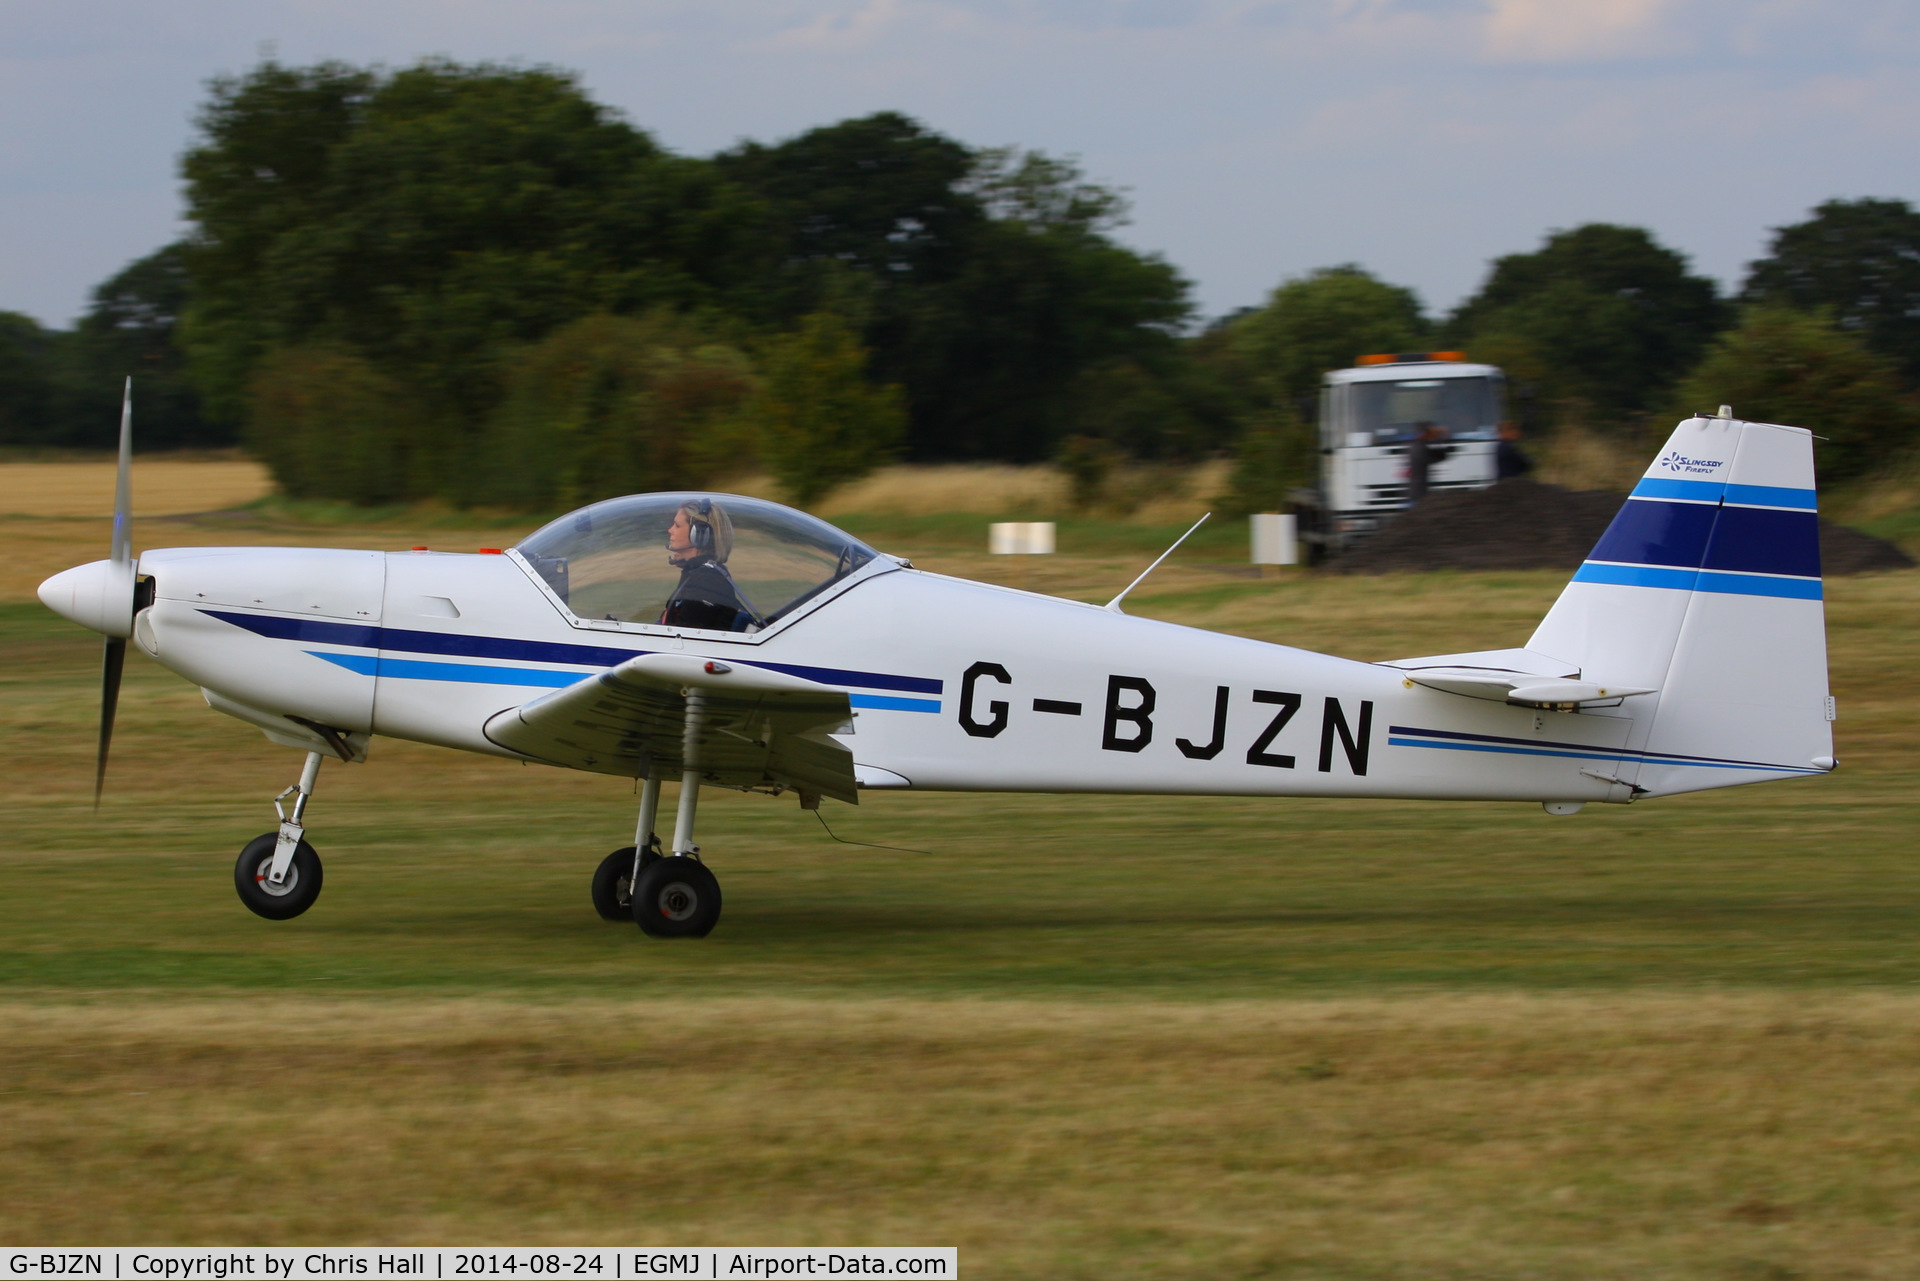 G-BJZN, 1982 Slingsby T-67A Firefly C/N 1997, at the Little Gransden Airshow 2014